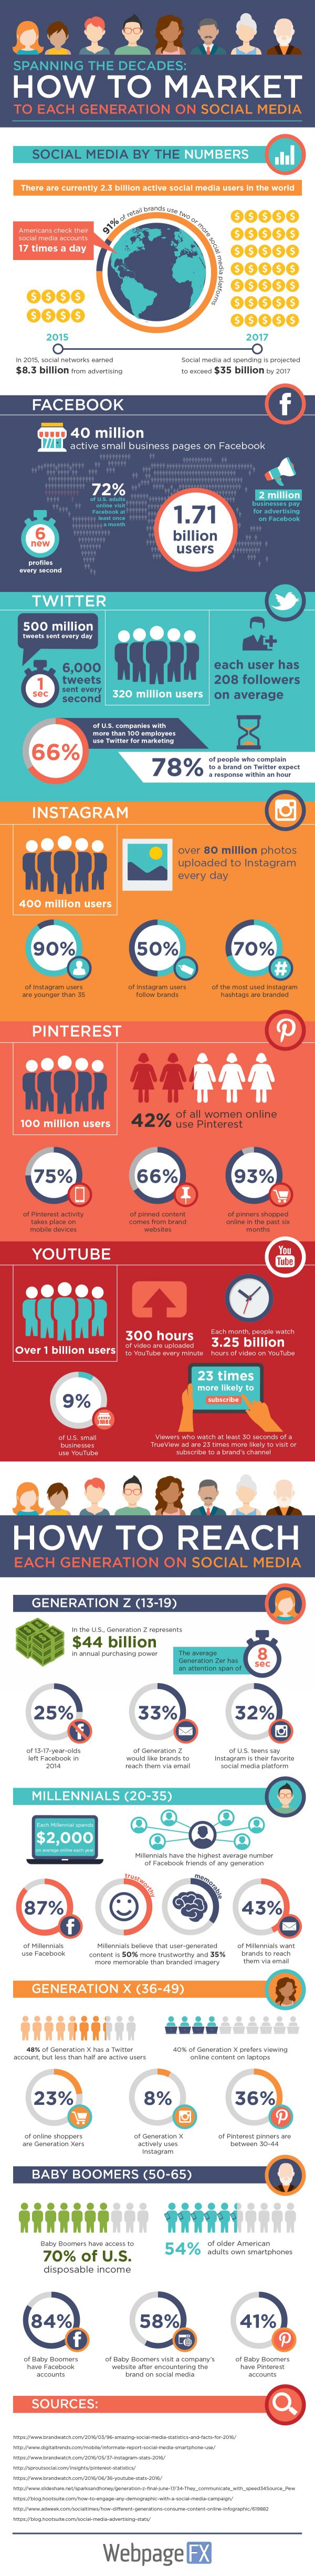 How to market to each generation - infographic